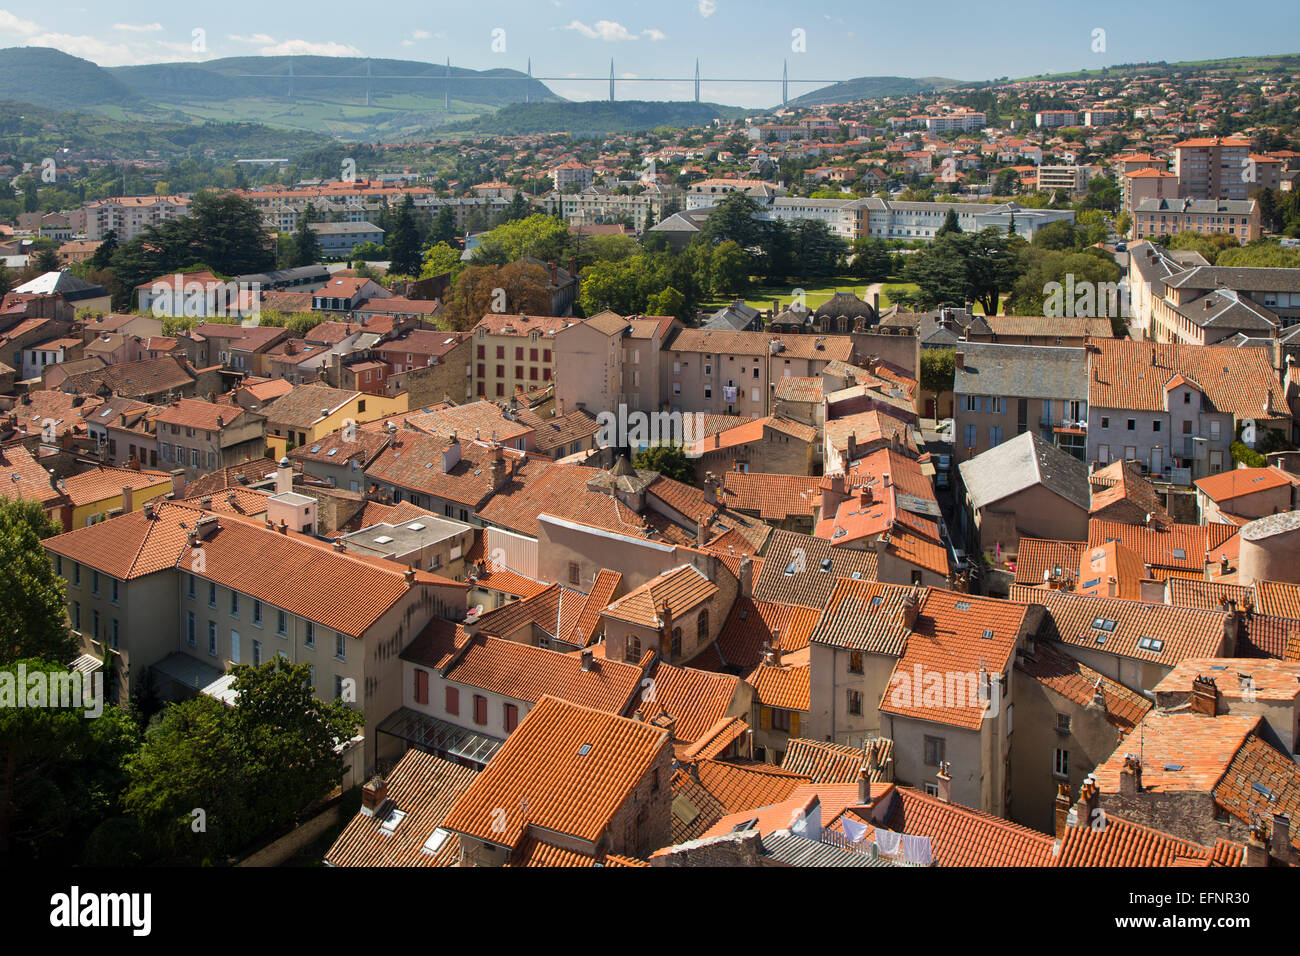 France, Aveyron, Midi-Pyrenees, Millau, cityscape view over the town centre from The Belfrey with Viaduc de Millau viaduct Stock Photo